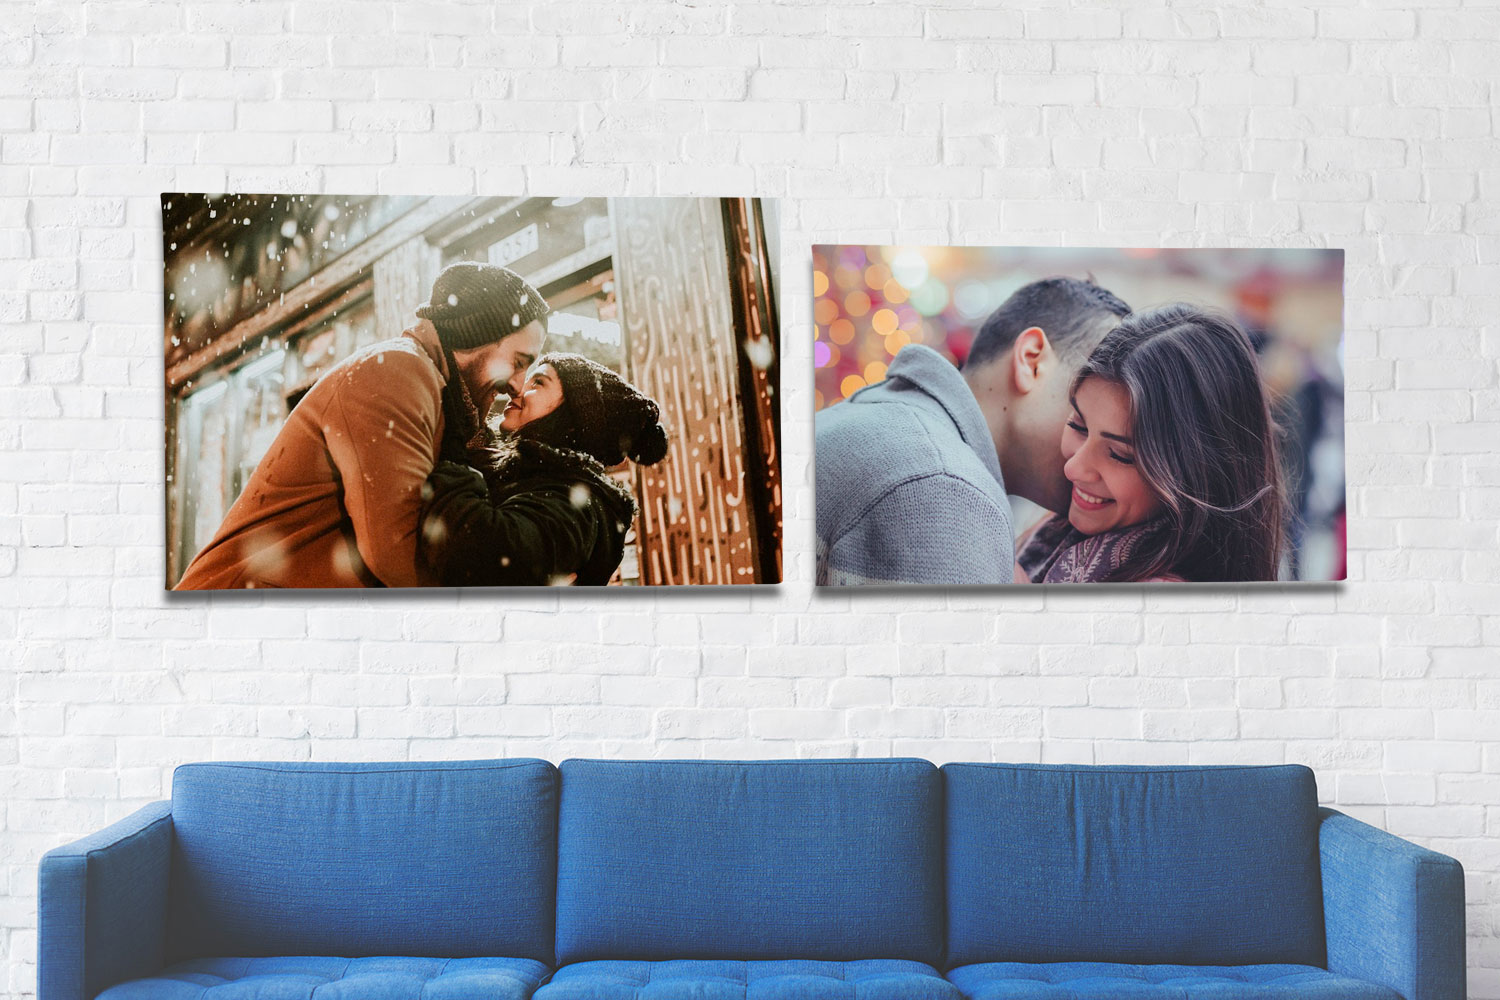 Best anniversary gifts for your wife - Photojaanic